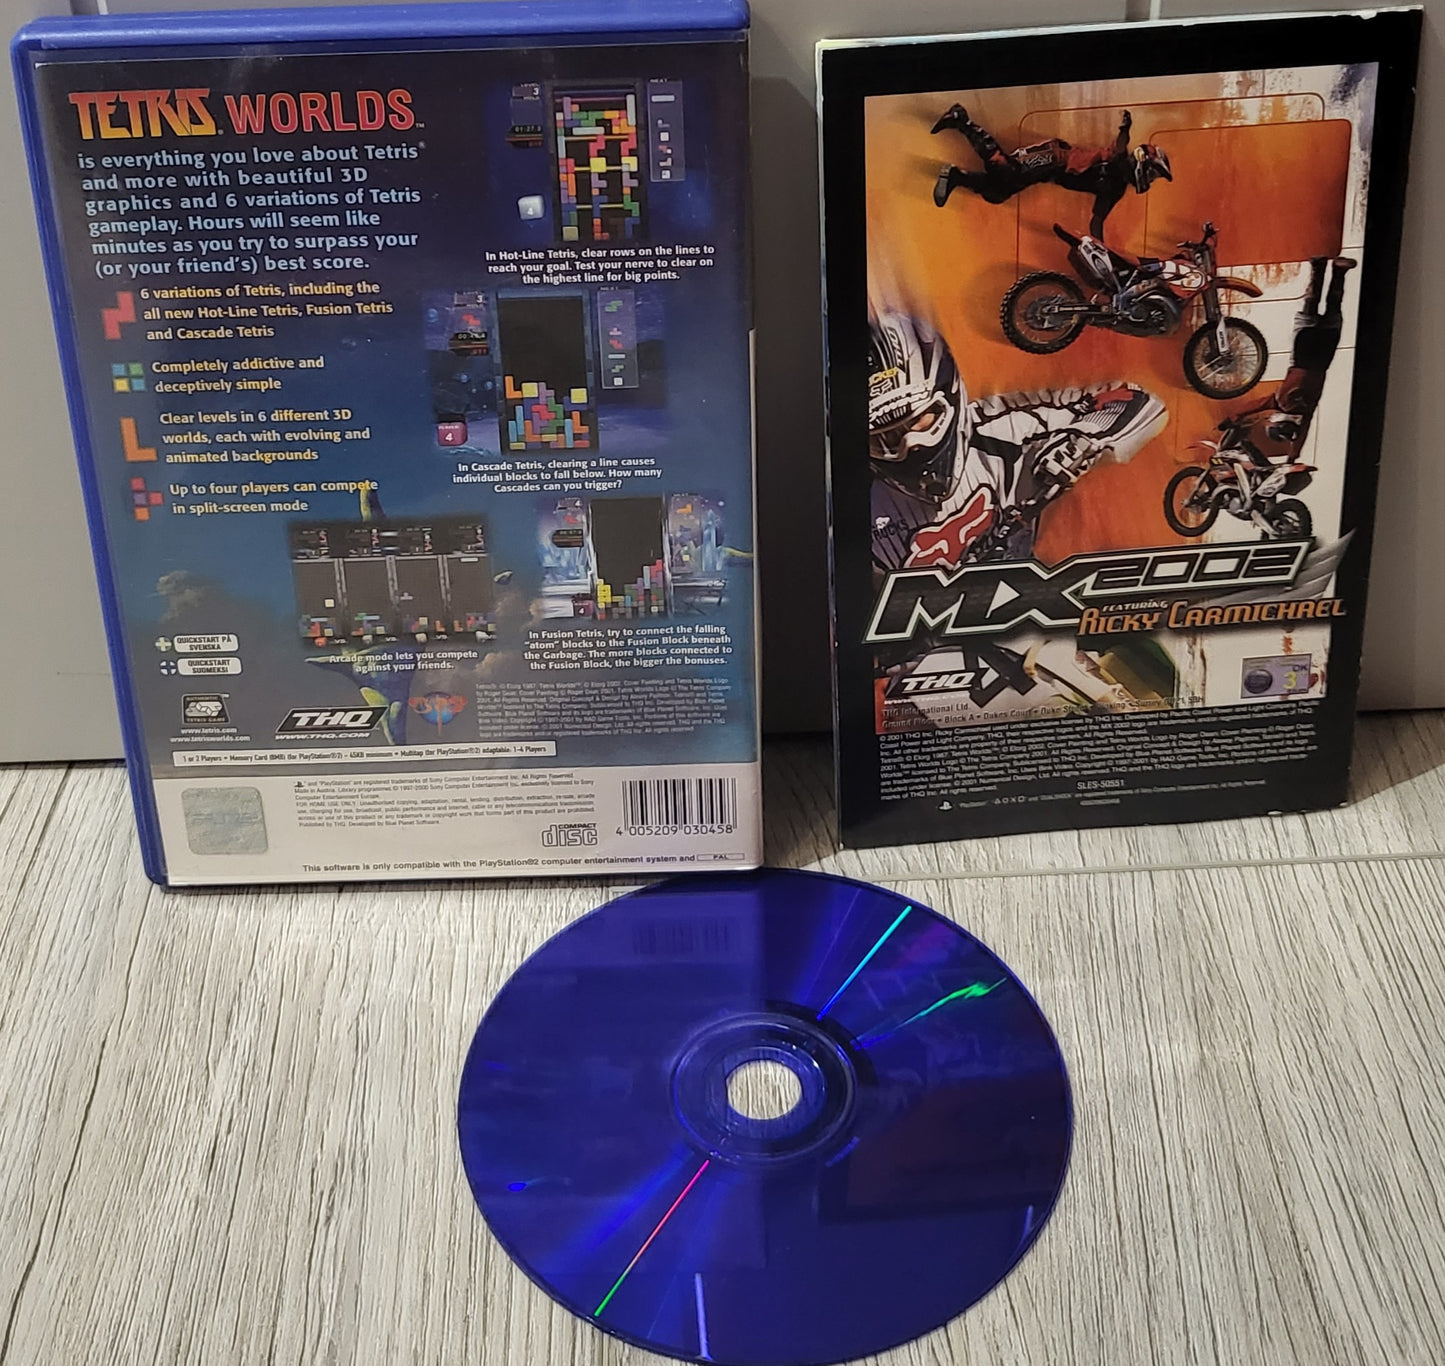 Tetris Worlds Sony Playstation 2 (PS2) Game